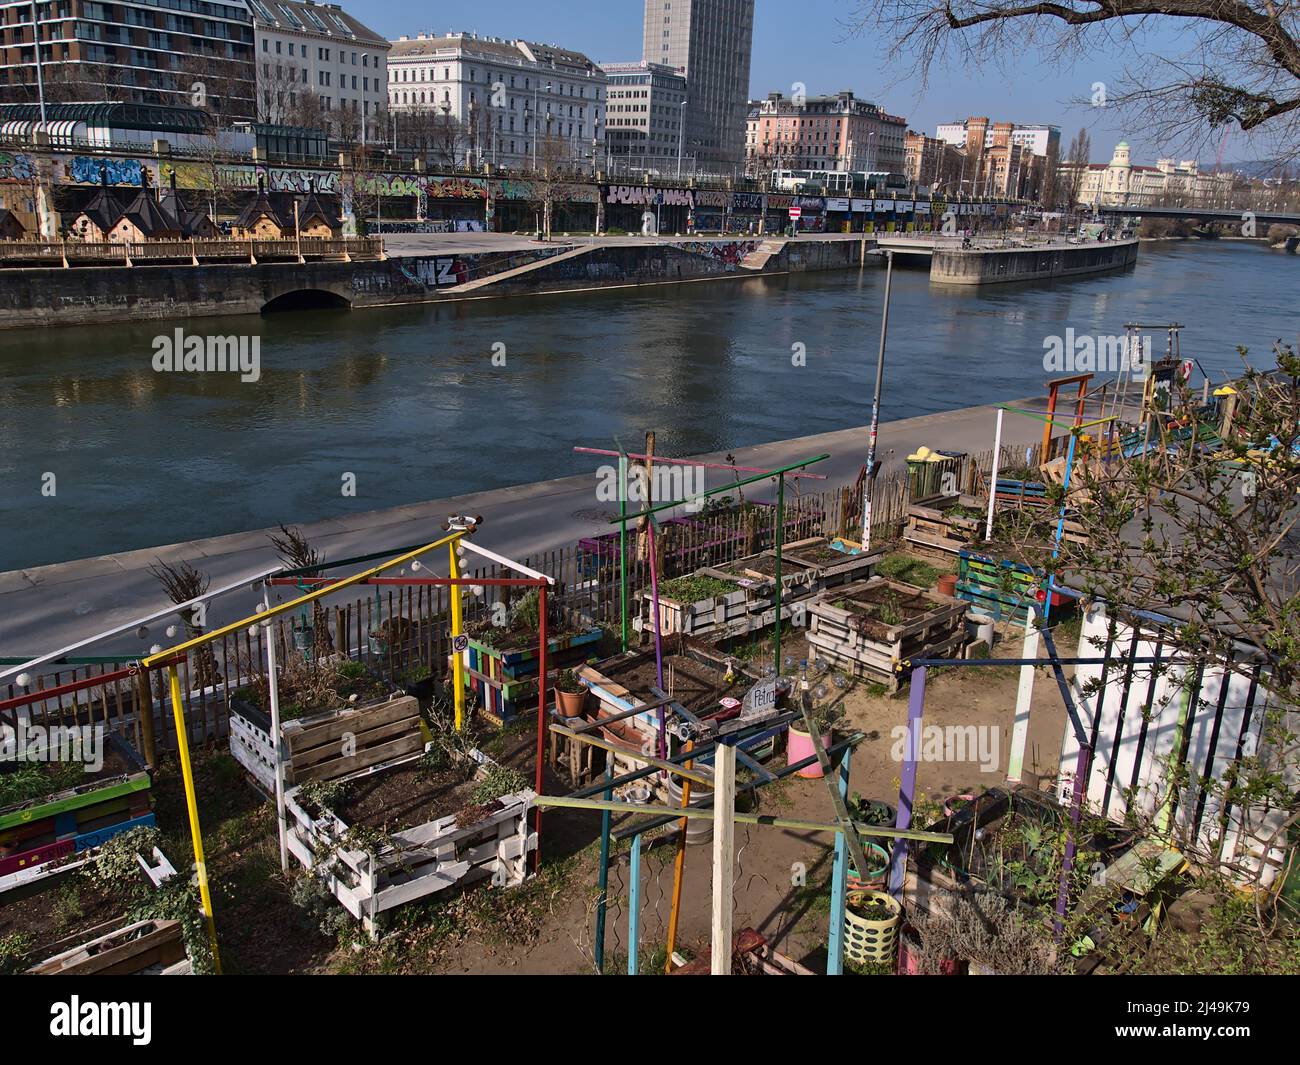 View of a community garden at the bank of river Donaukanal in the historic center of Vienna, Austria on sunny day in spring. Stock Photo